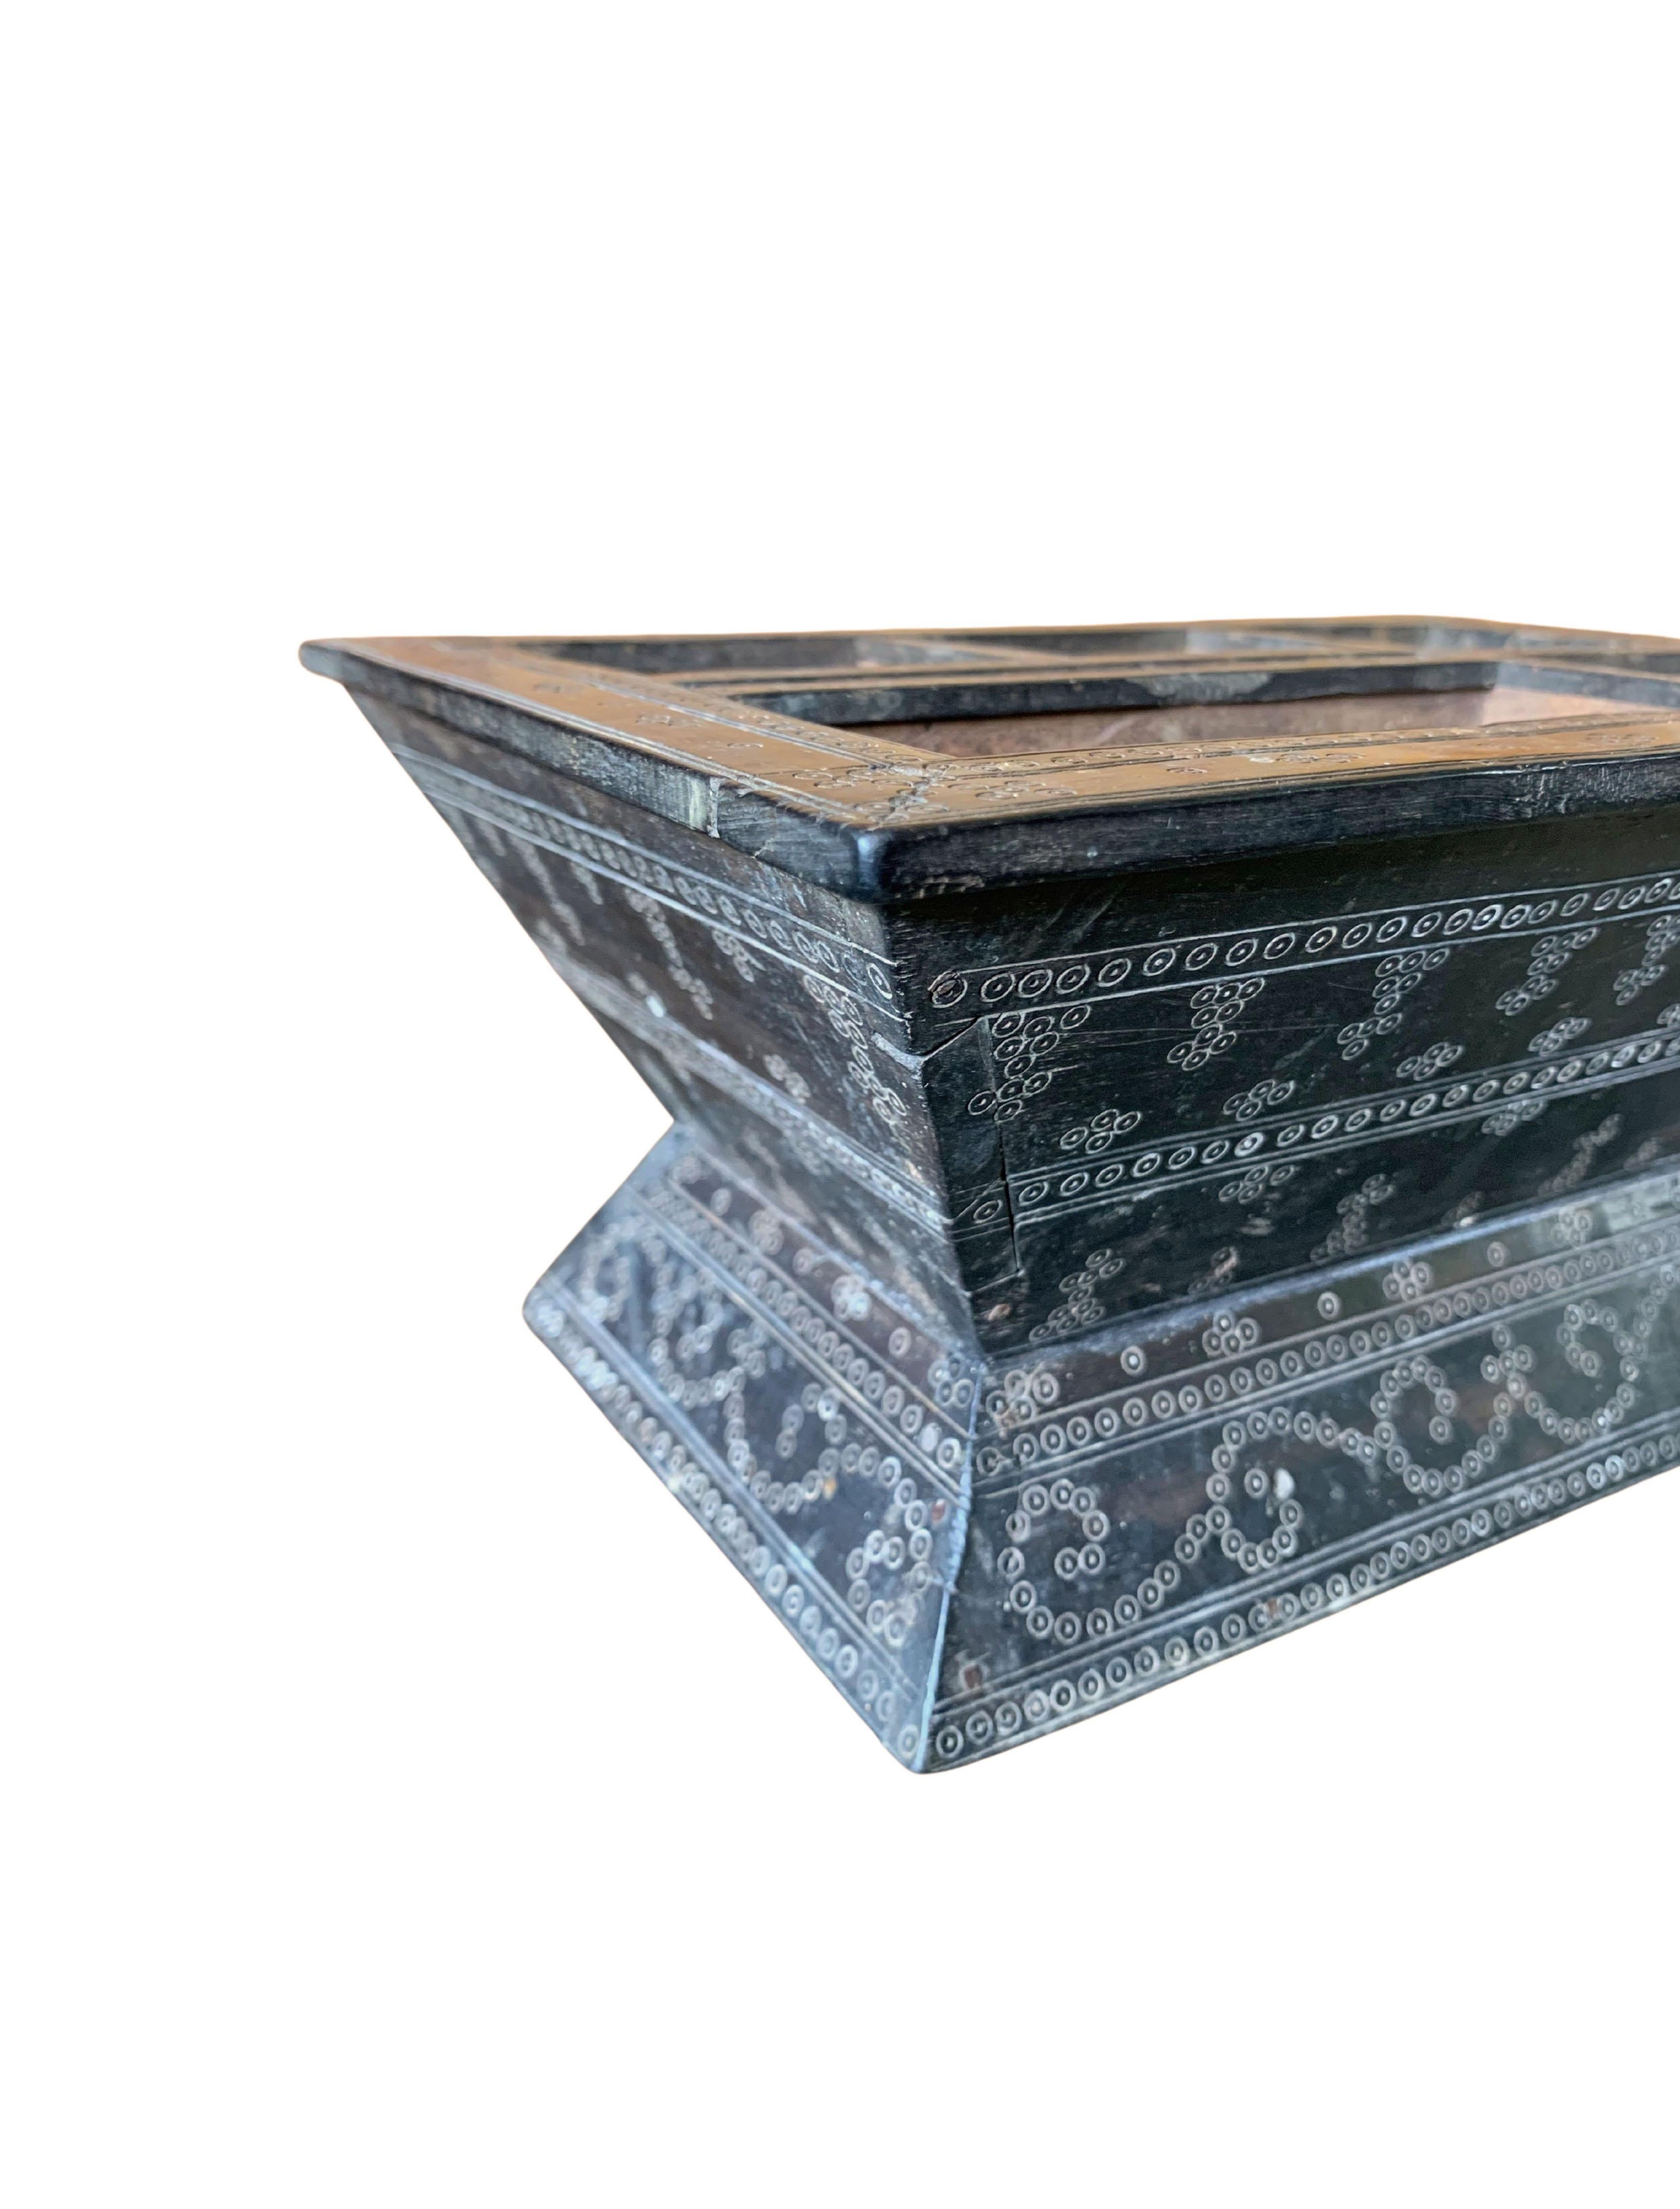 20th Century Betel Nut Box from Sumba Island with Tribal Engravings, Indonesia, c. 1950 For Sale